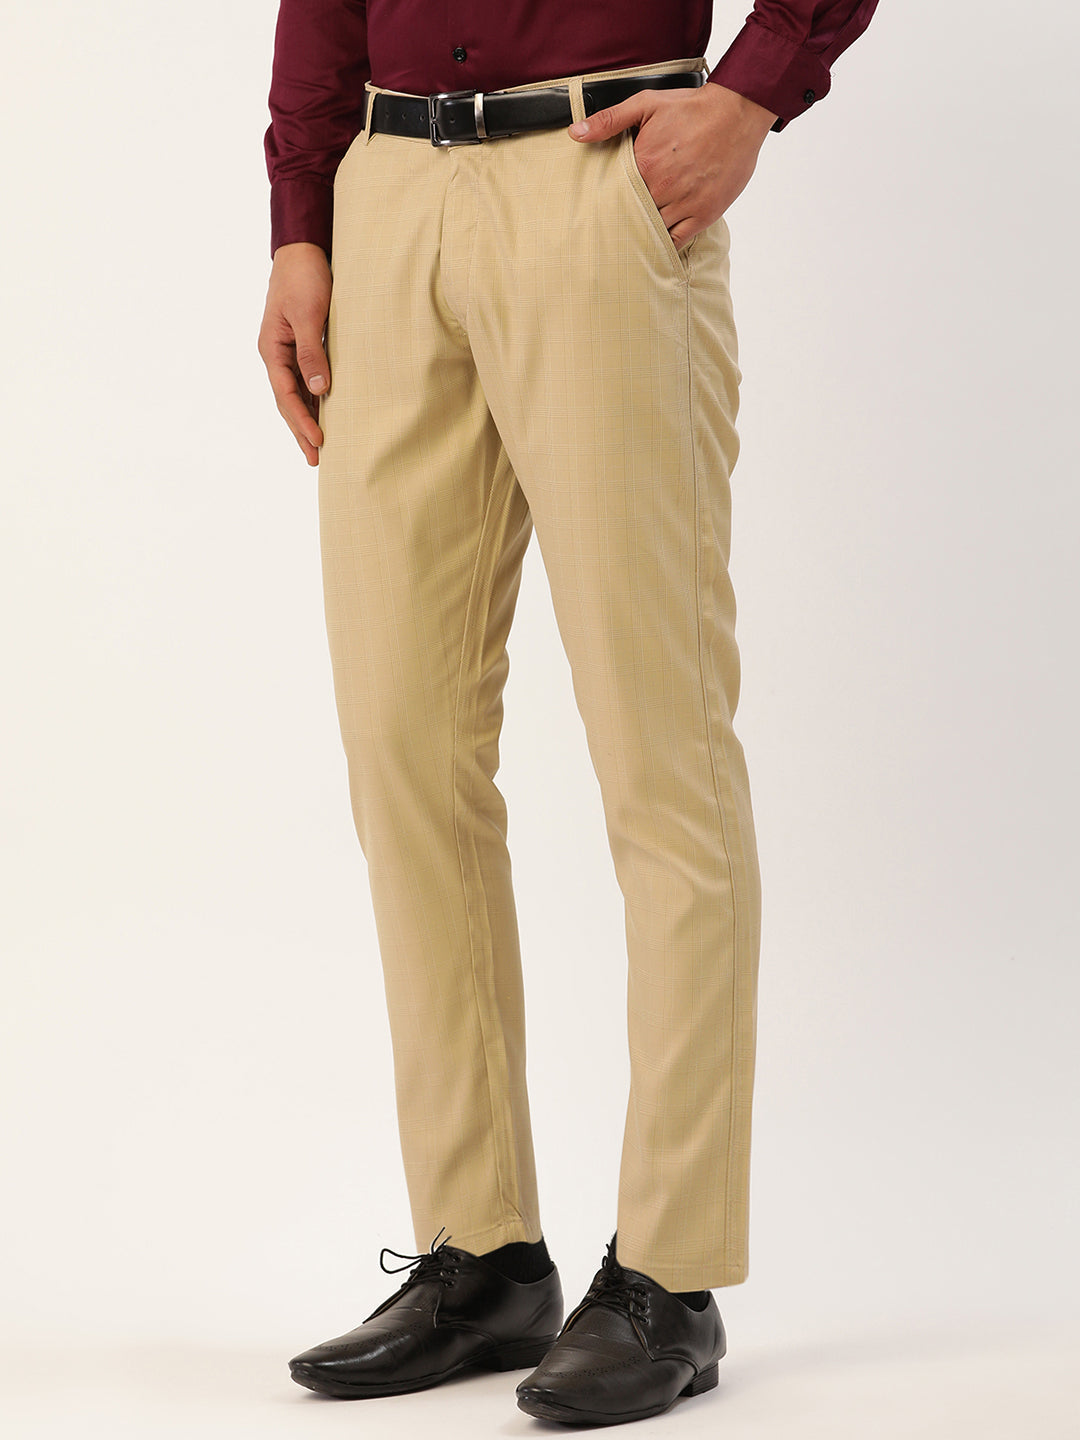 Any idea where to buy or find pleated trousers like these? Preferably in EU  : r/mensfashionadvice